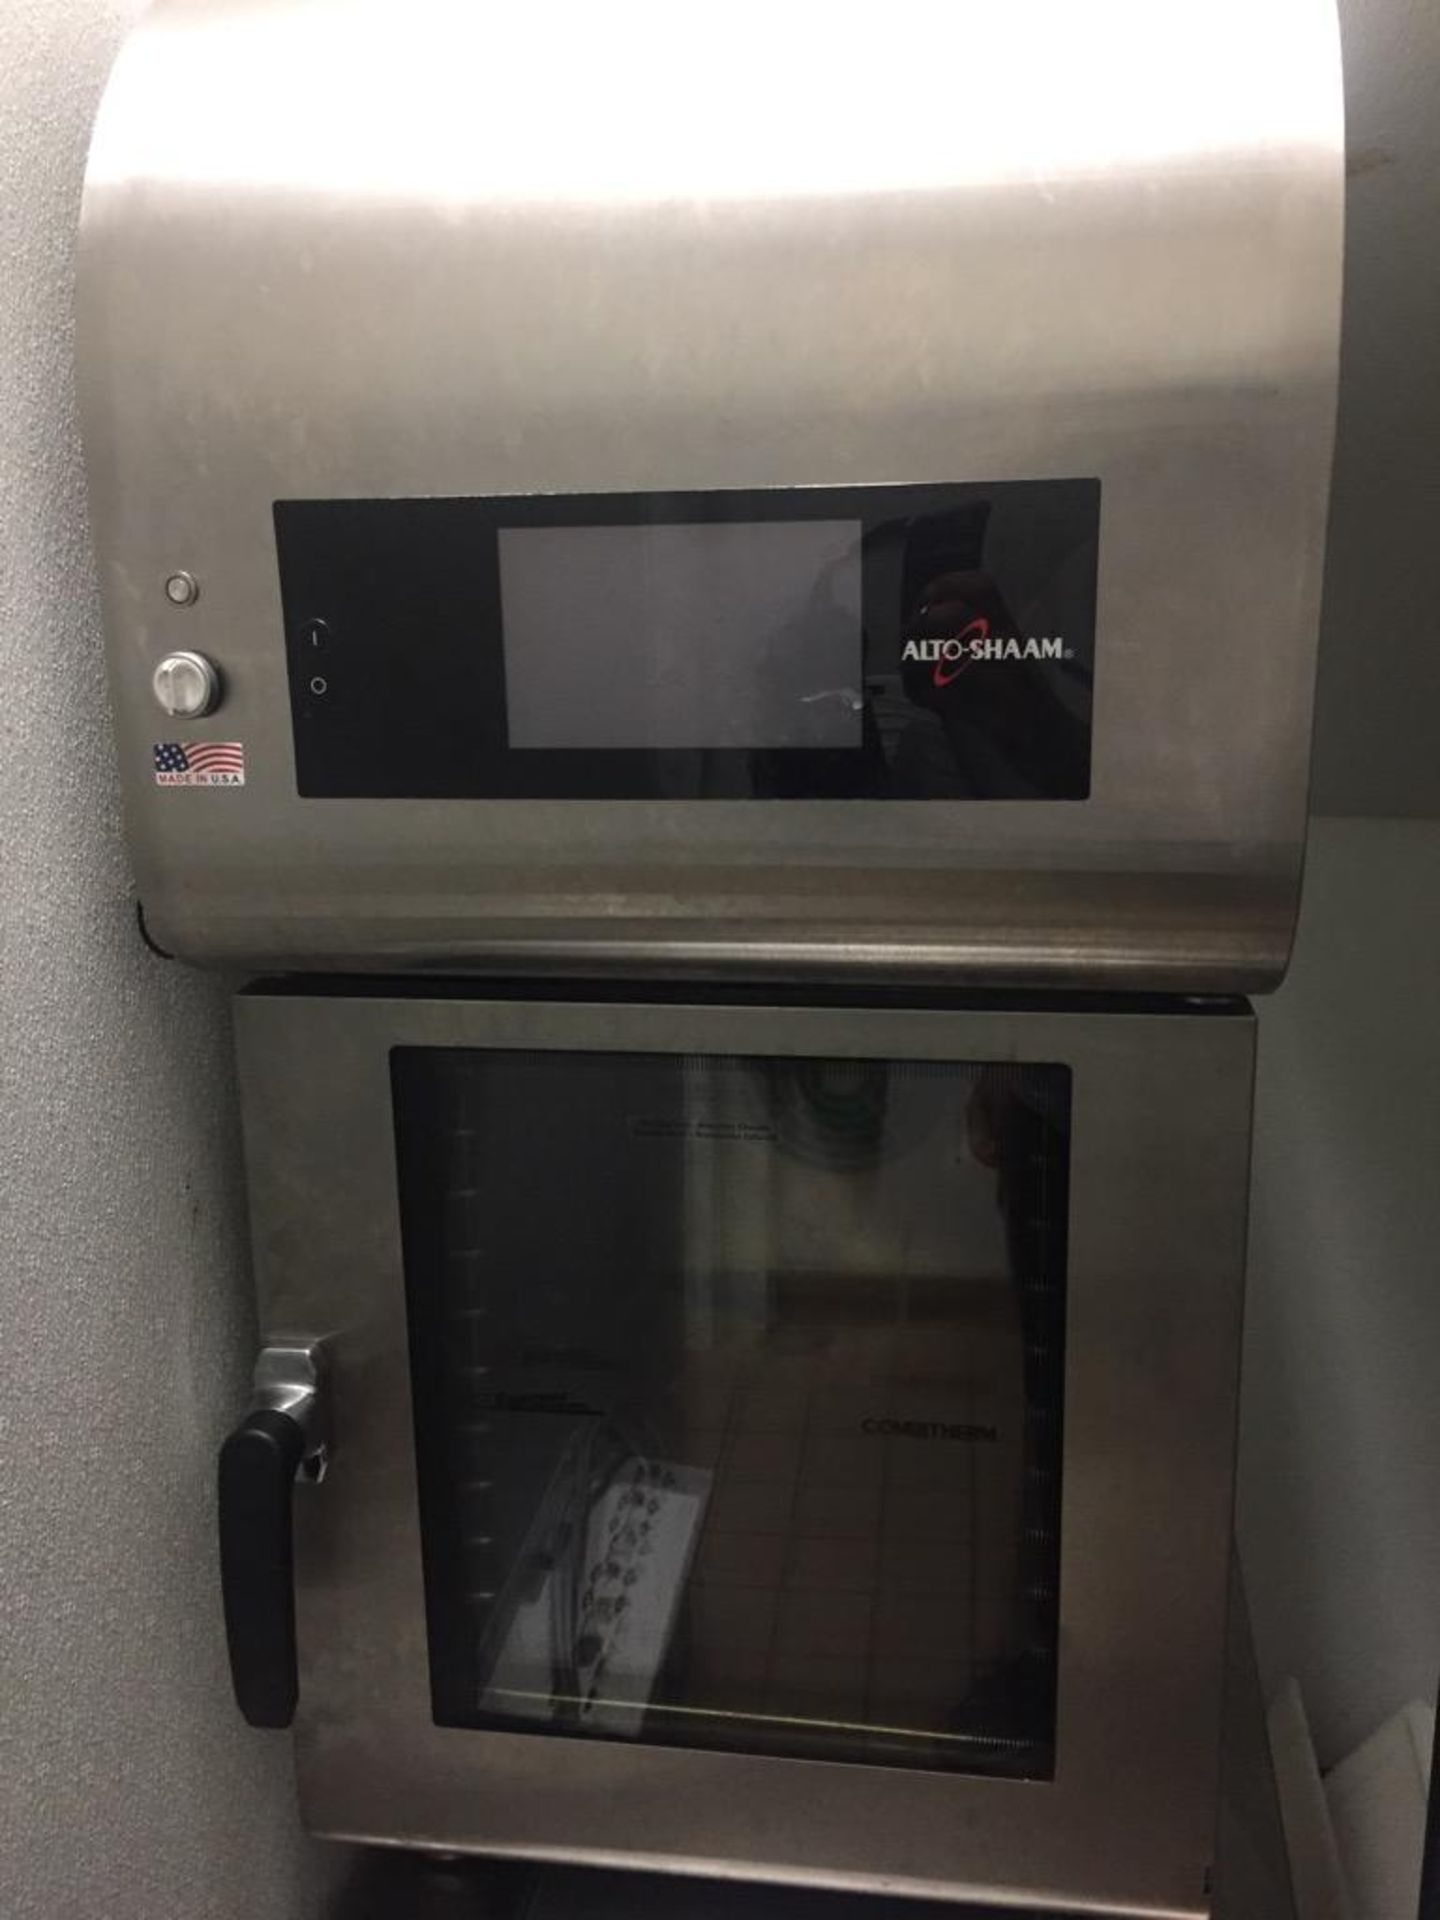 ALTO SHAAM CT EXPRESS COMBITHERM CONVECTION OVEN